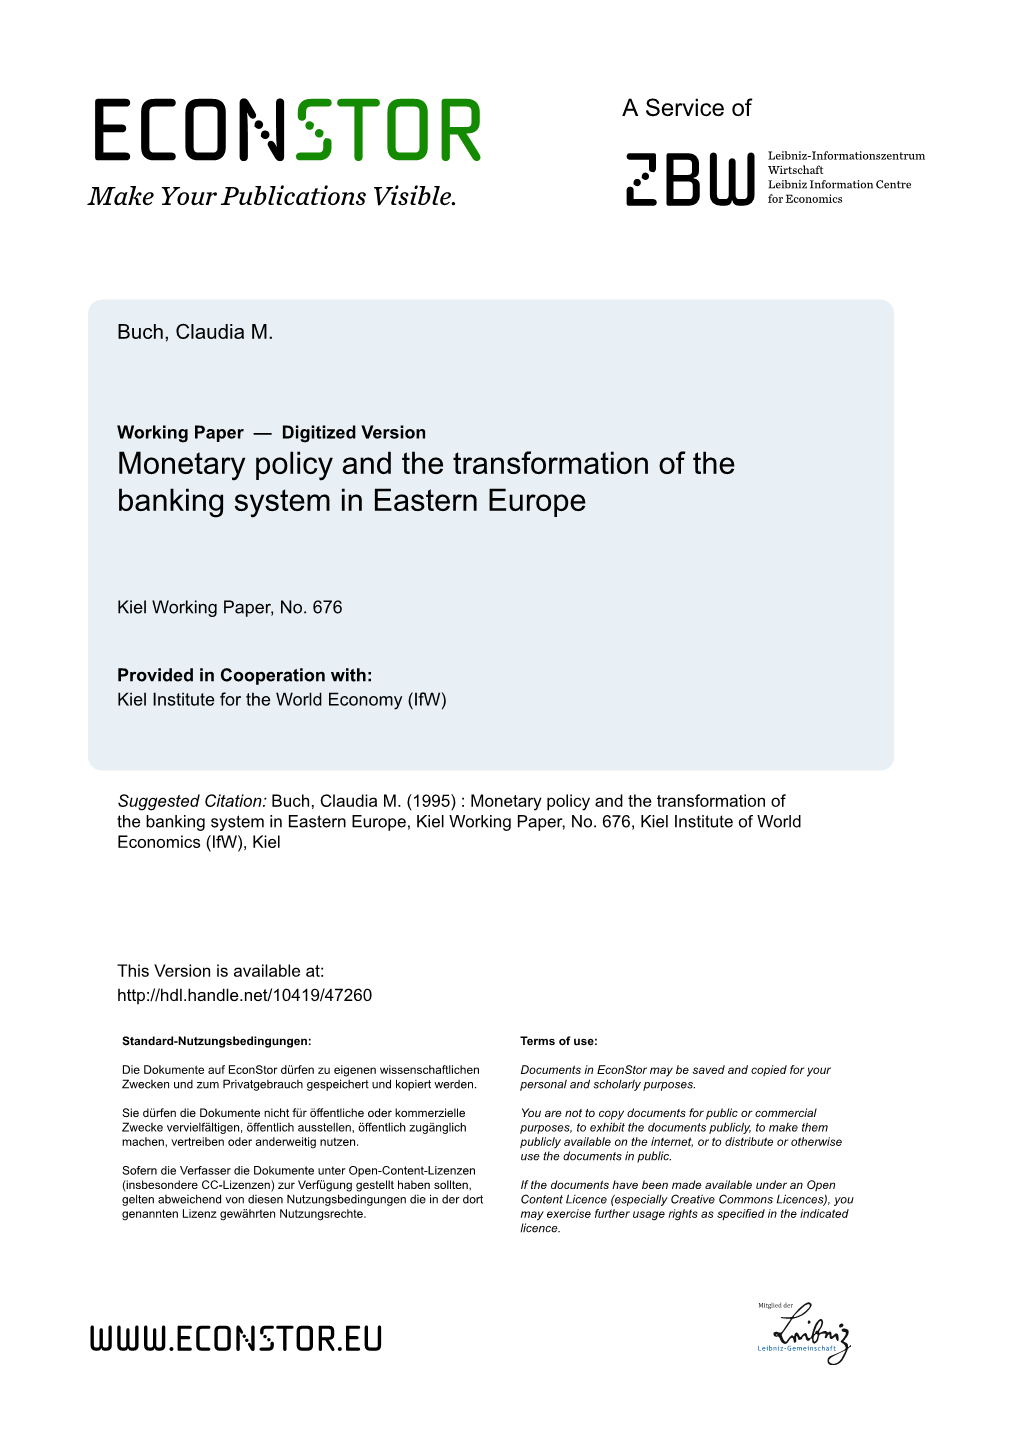 Monetary Policy and the Transformation of the Banking System in Eastern Europe